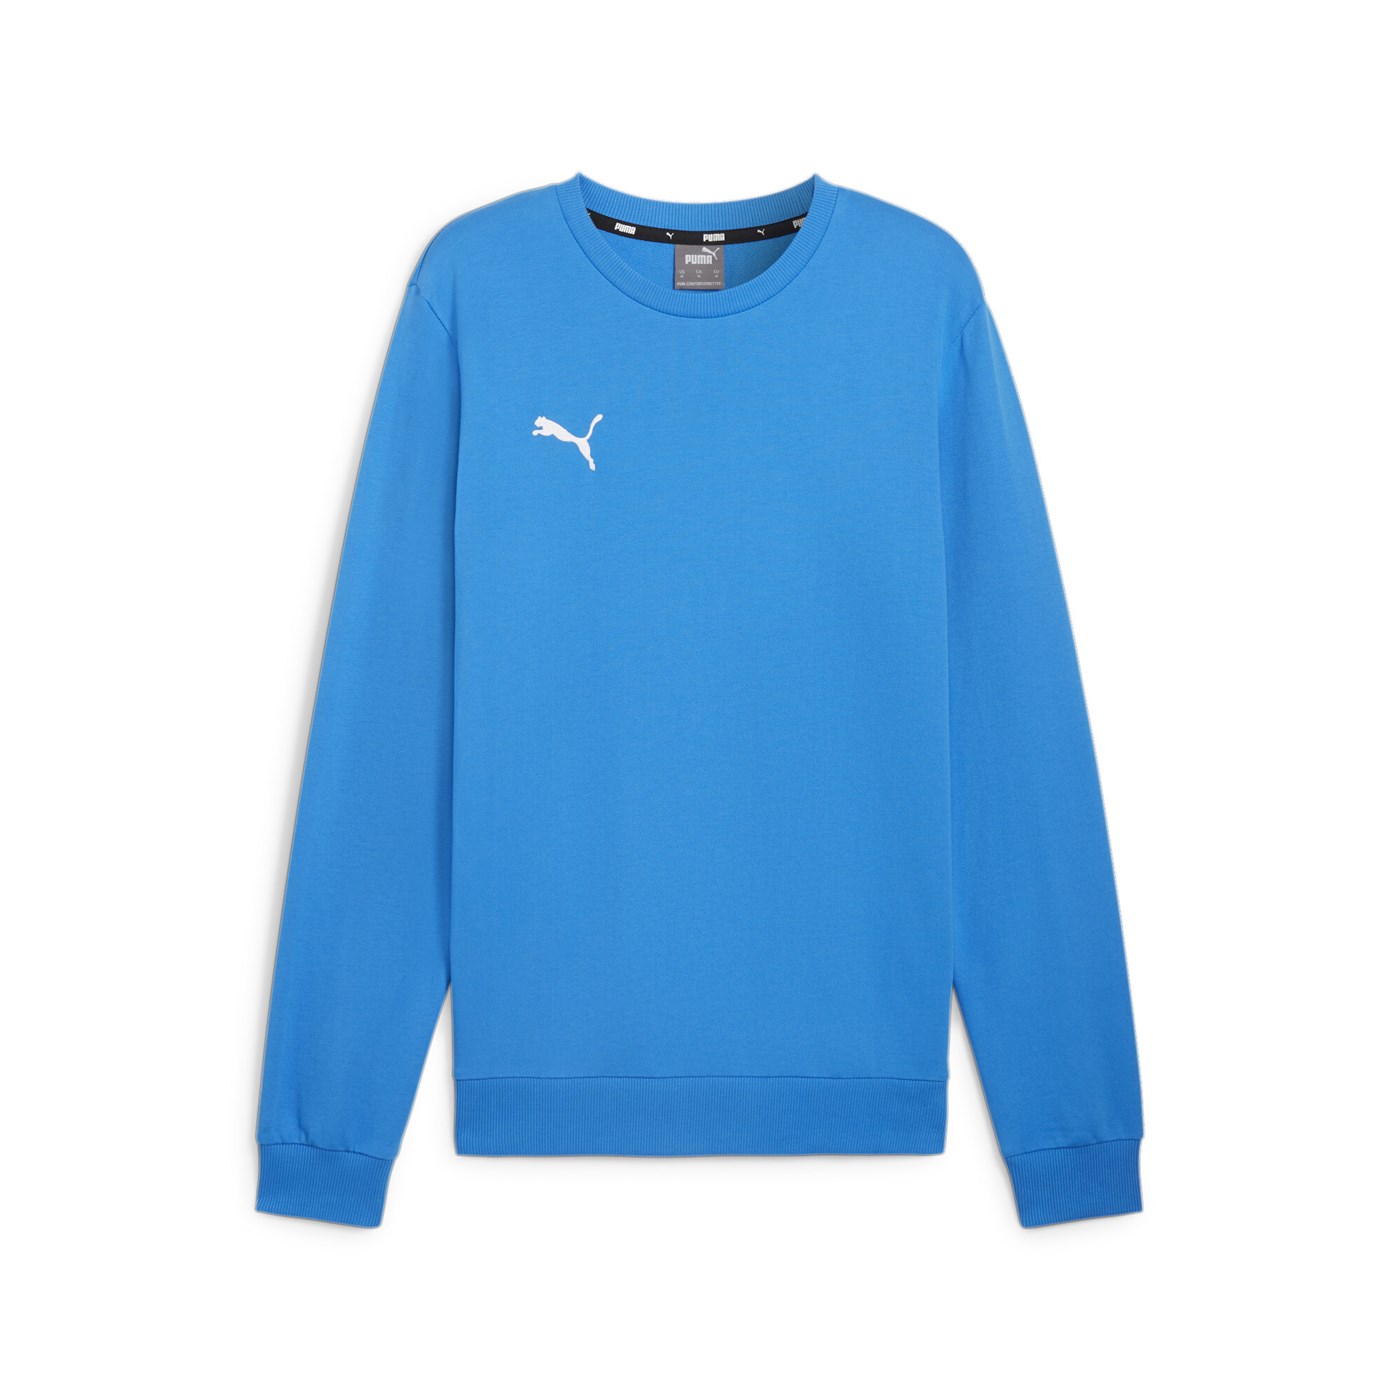 teamGOAL Casuals Crew Neck Sweat 658592